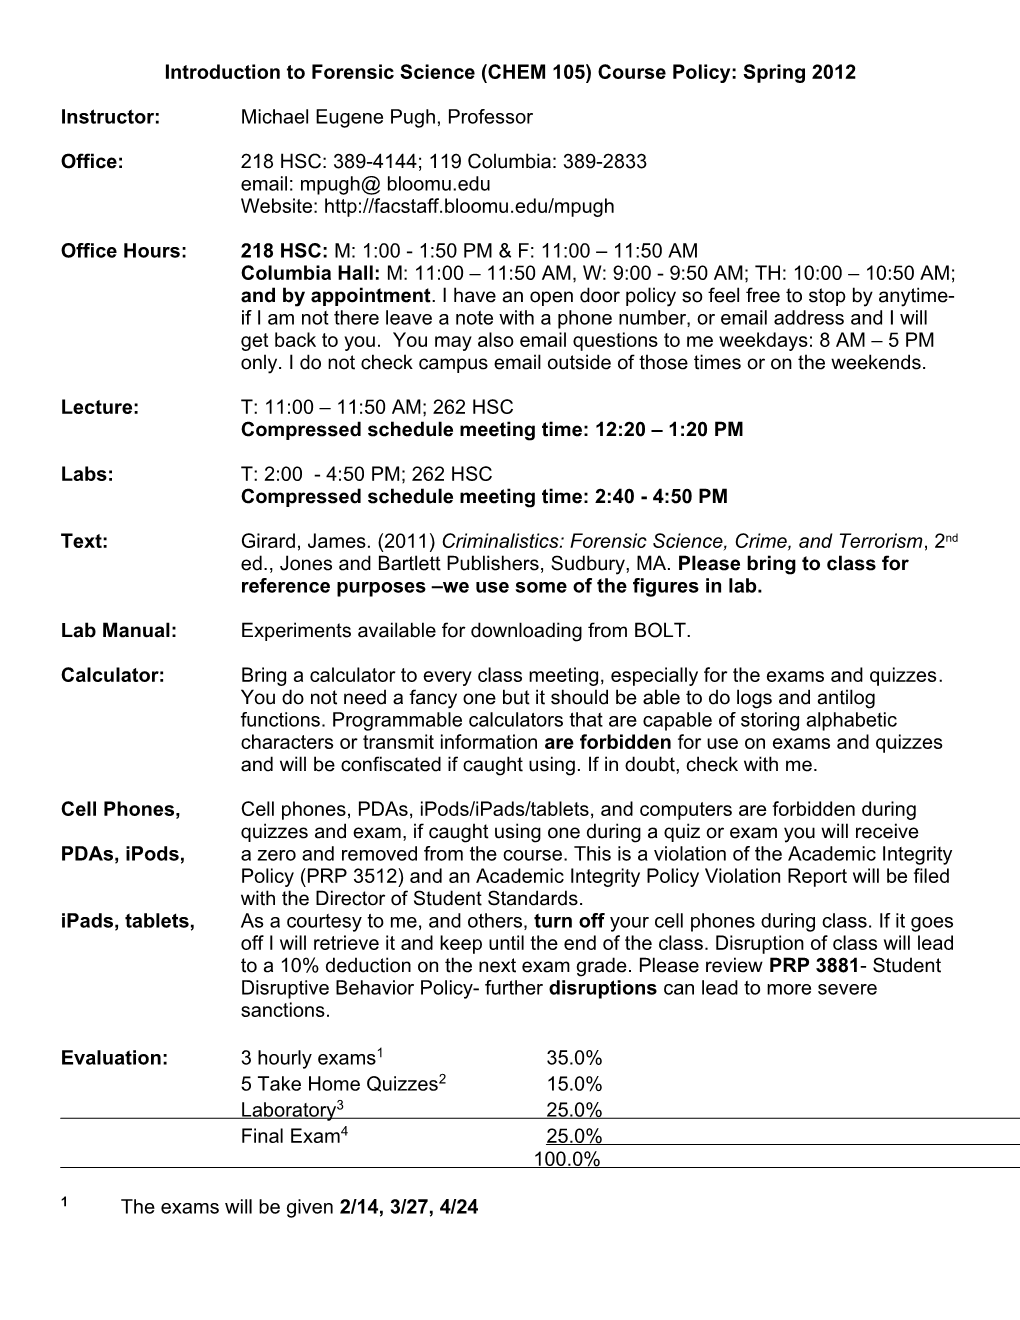 Introduction to Forensic Science (CHEM 105)Course Policy: Spring 2012